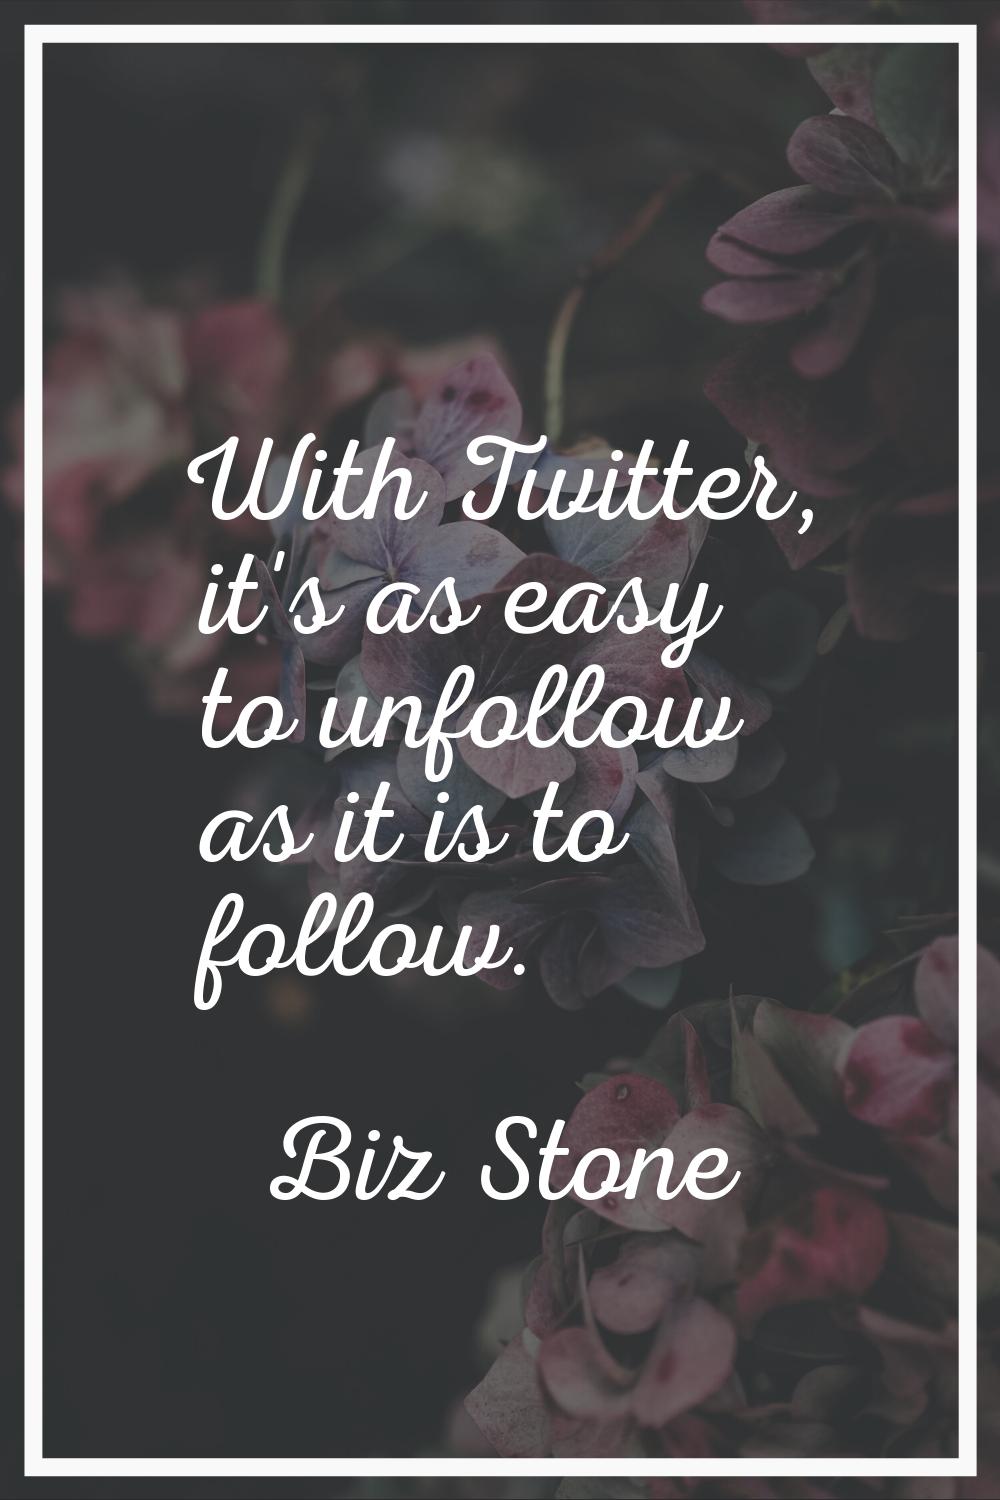 With Twitter, it's as easy to unfollow as it is to follow.